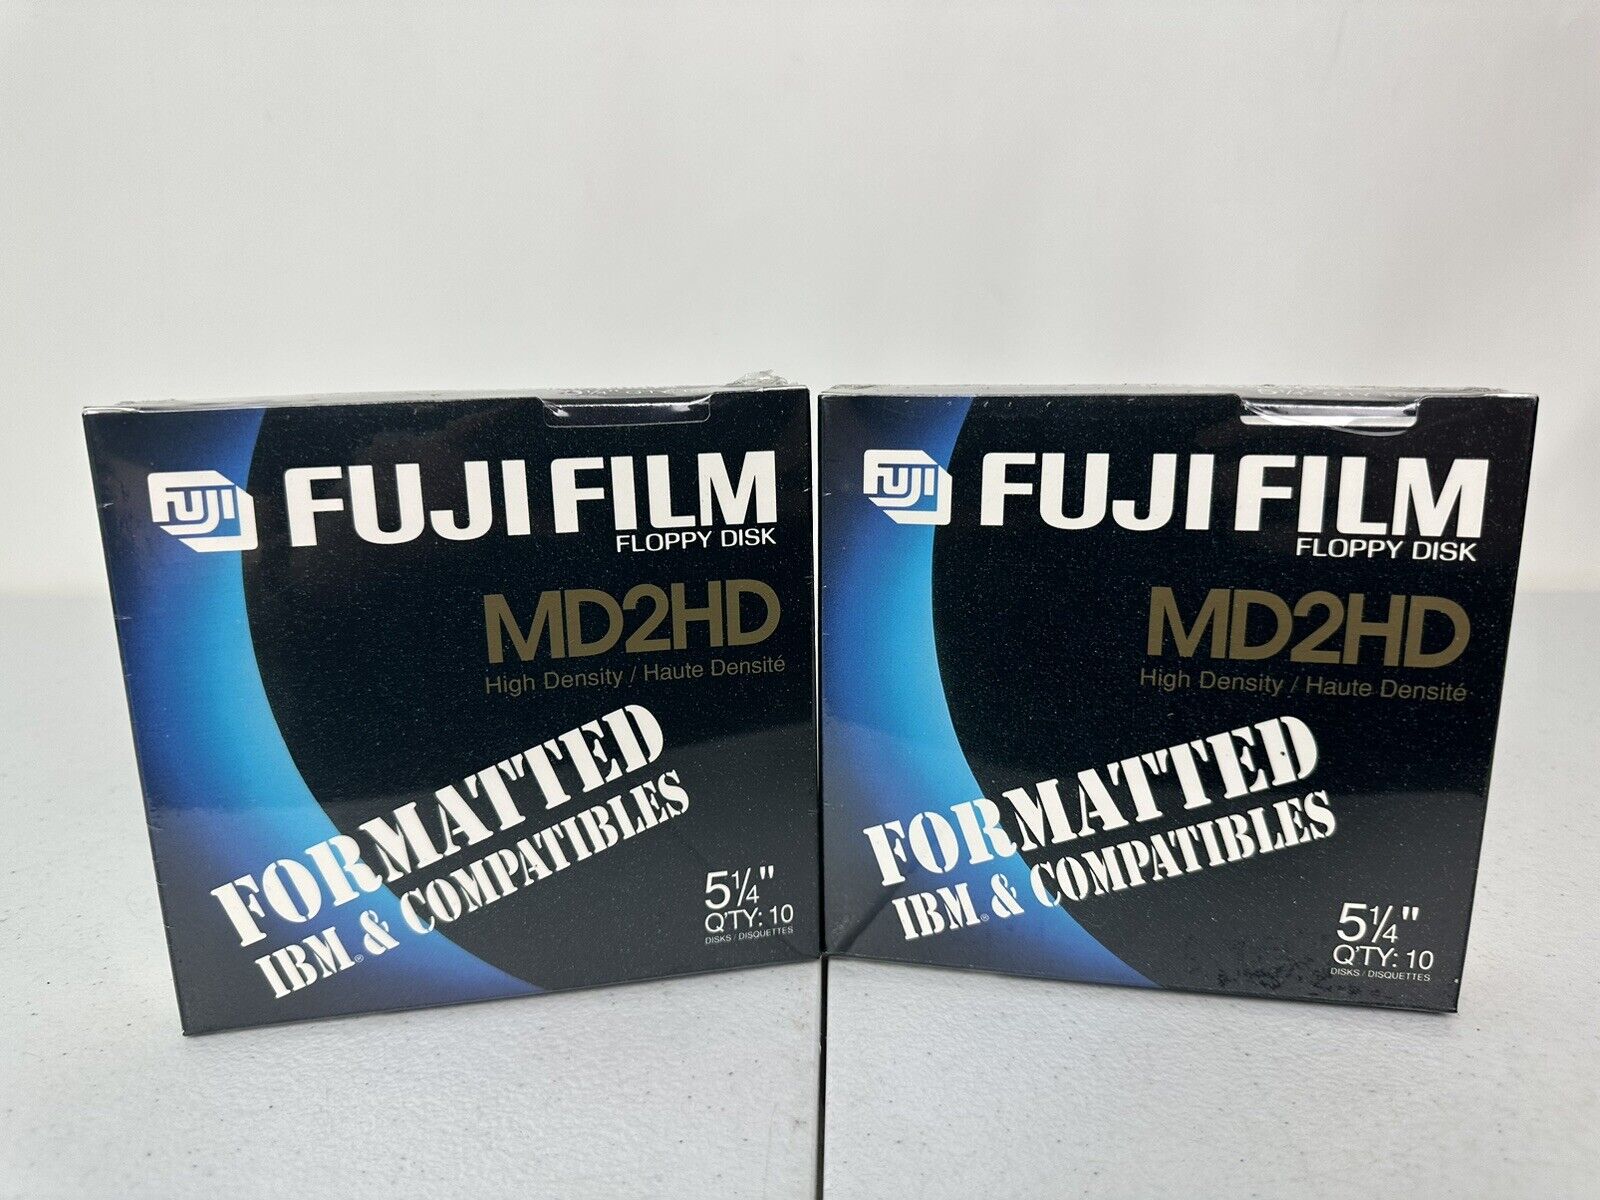 Fuji Film Floppy Disk MD2HD Qty. (2) 10-Pack 5-1/4 PC/AT Compatible 20 NEW Disks